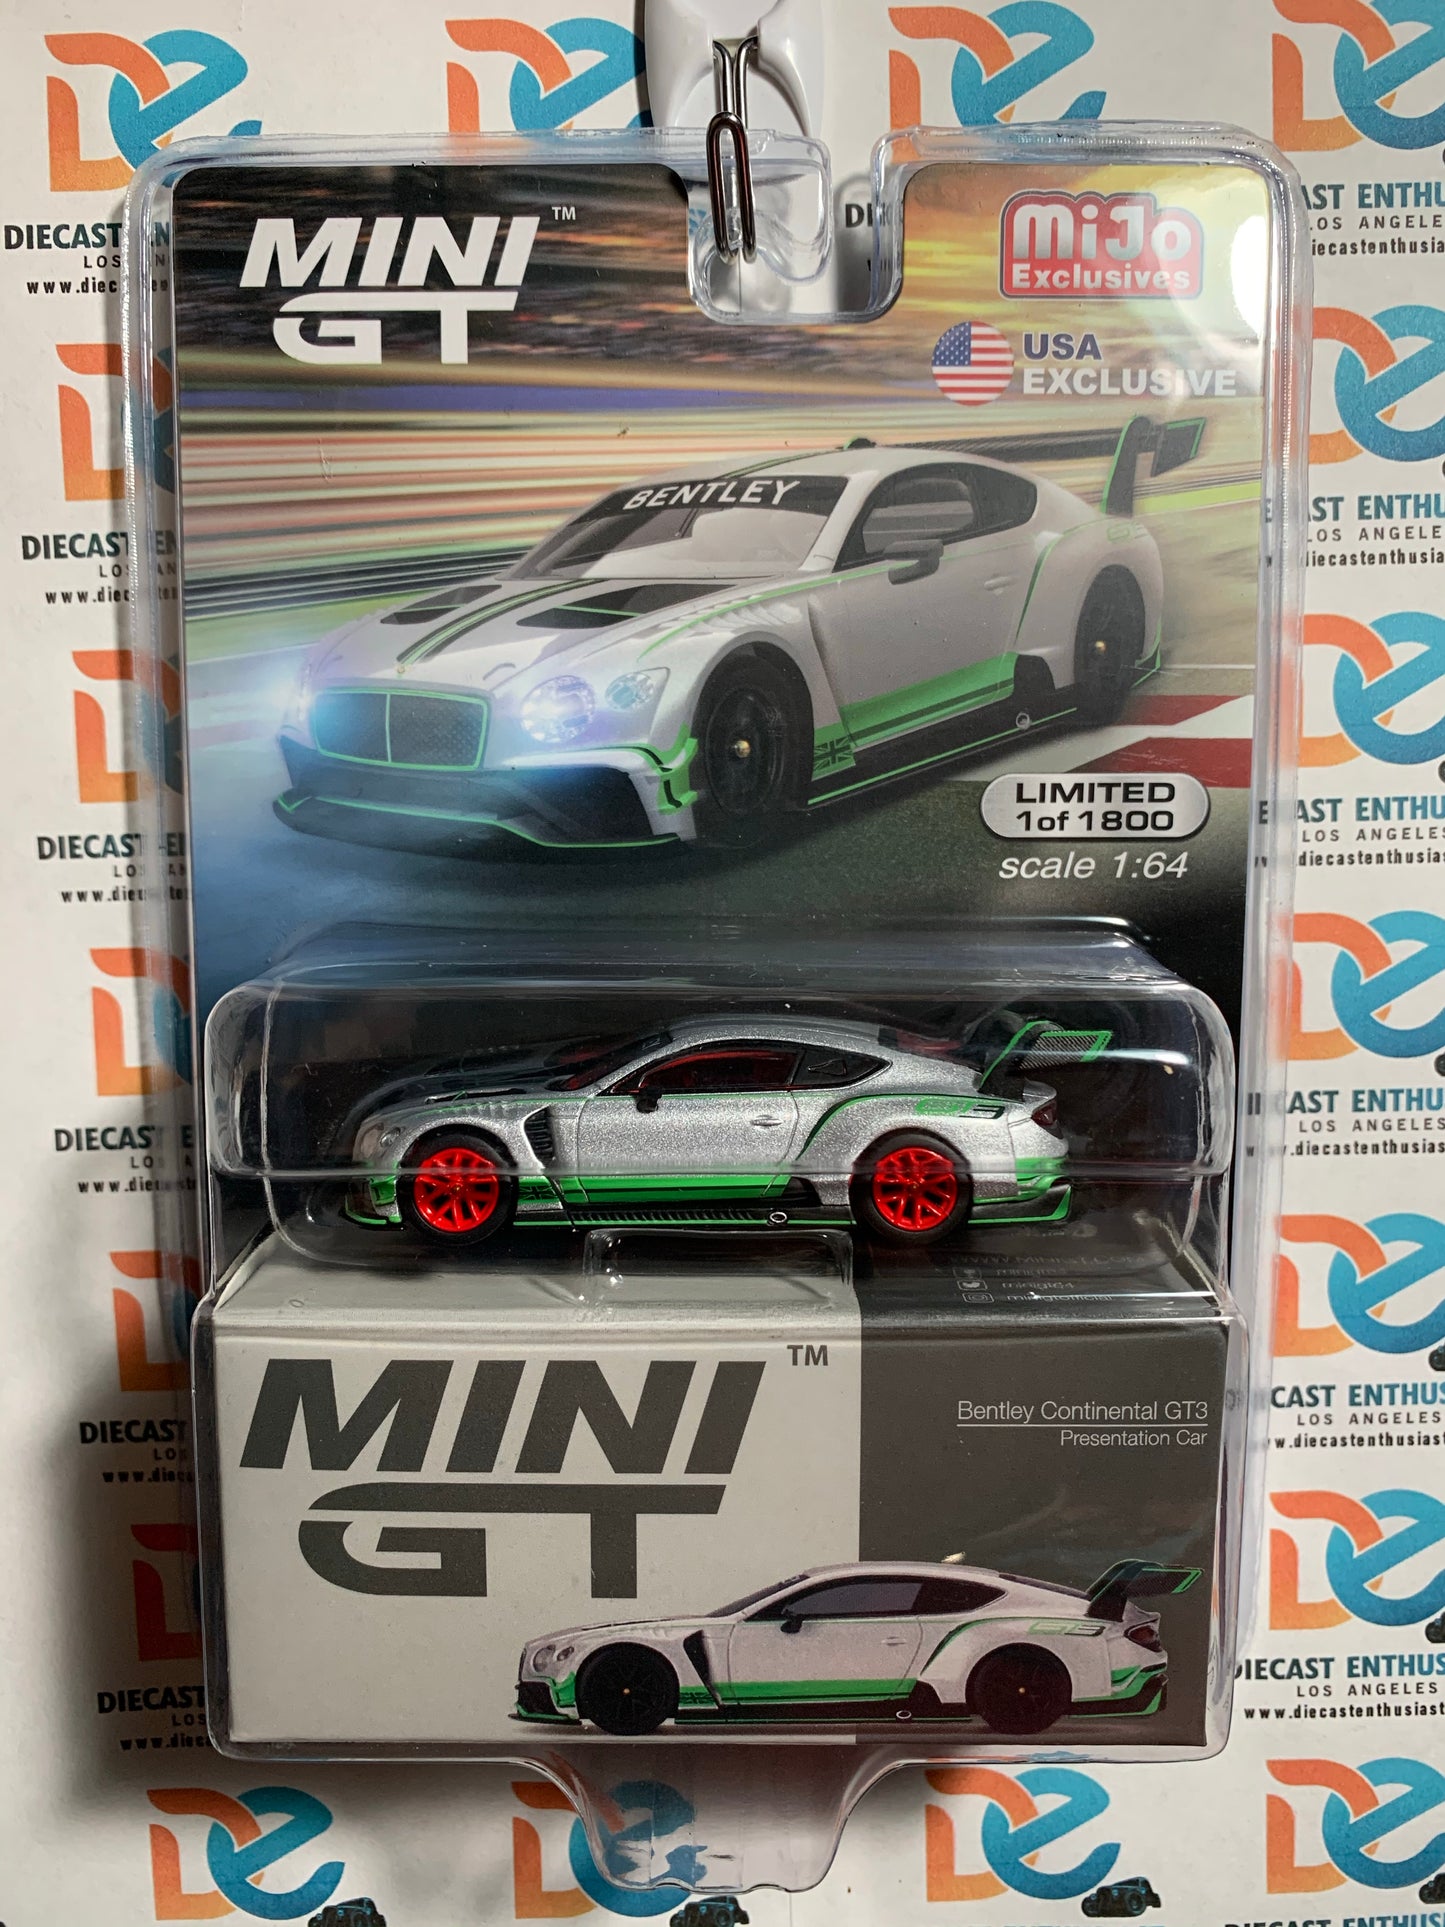 CHASE Mini GT Mijo Exclusive 176 Bentley Continental GT3 Silver 1:64